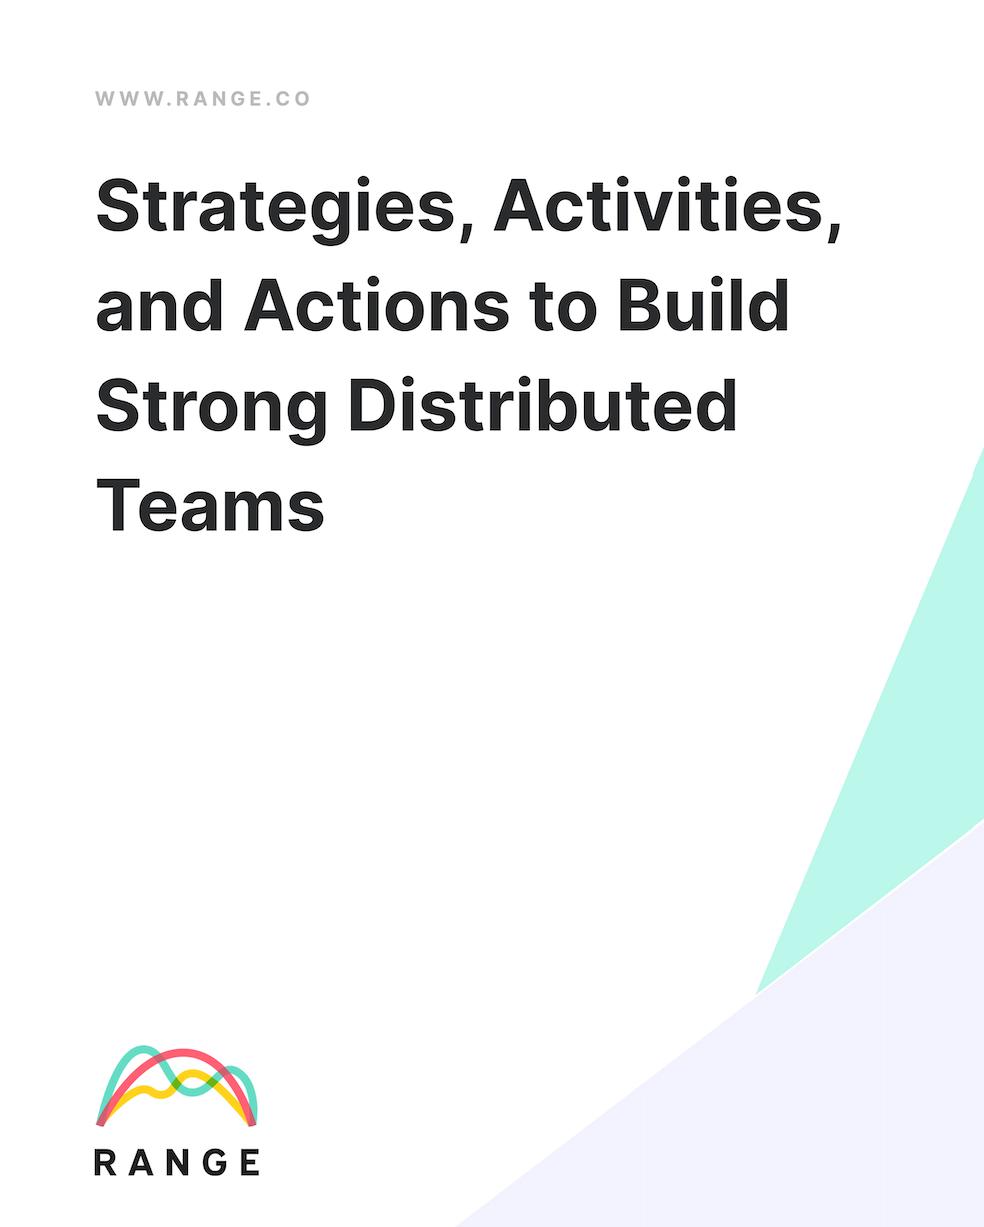 Strategies, Activities, and Actions to Build Strong Distributed Teams